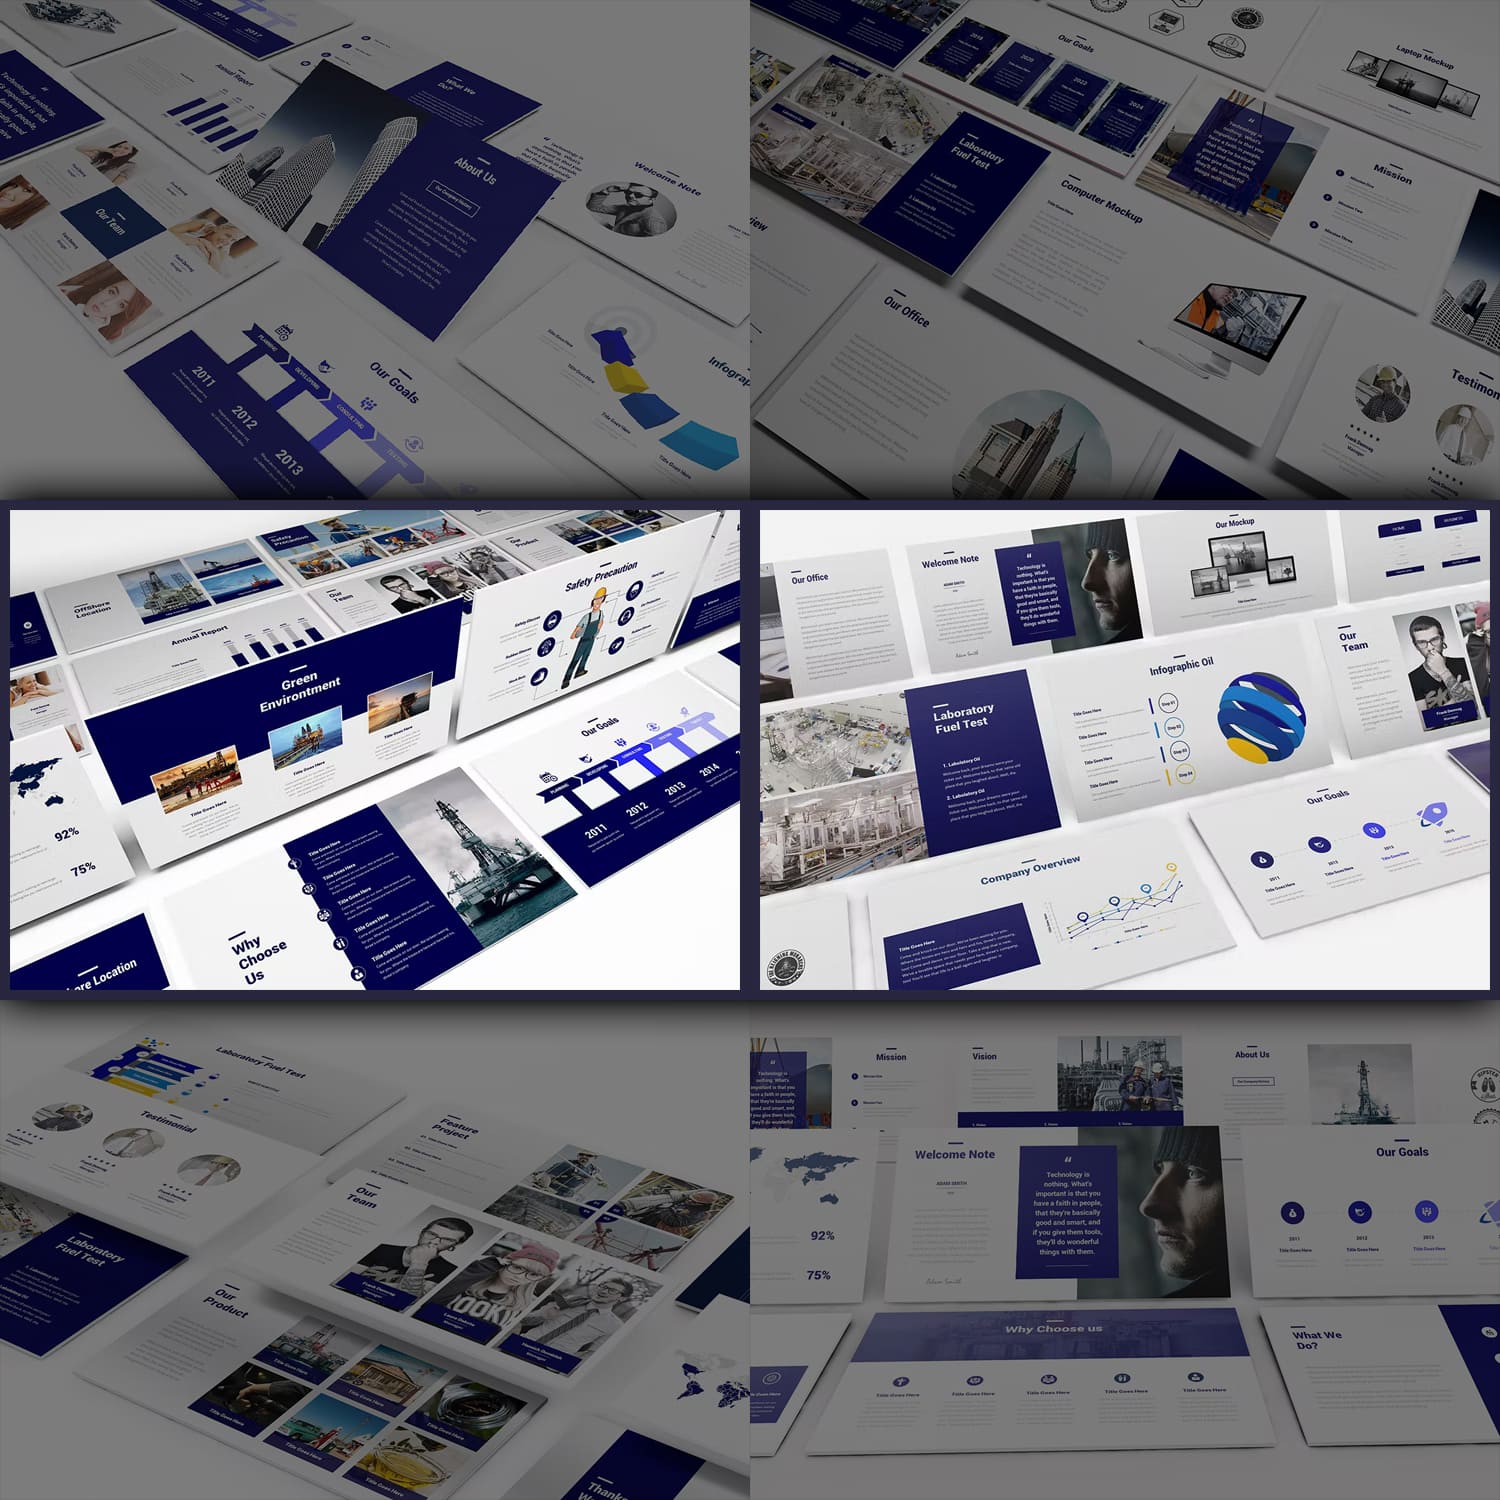 Oil and gas powerpoint template from Incools.